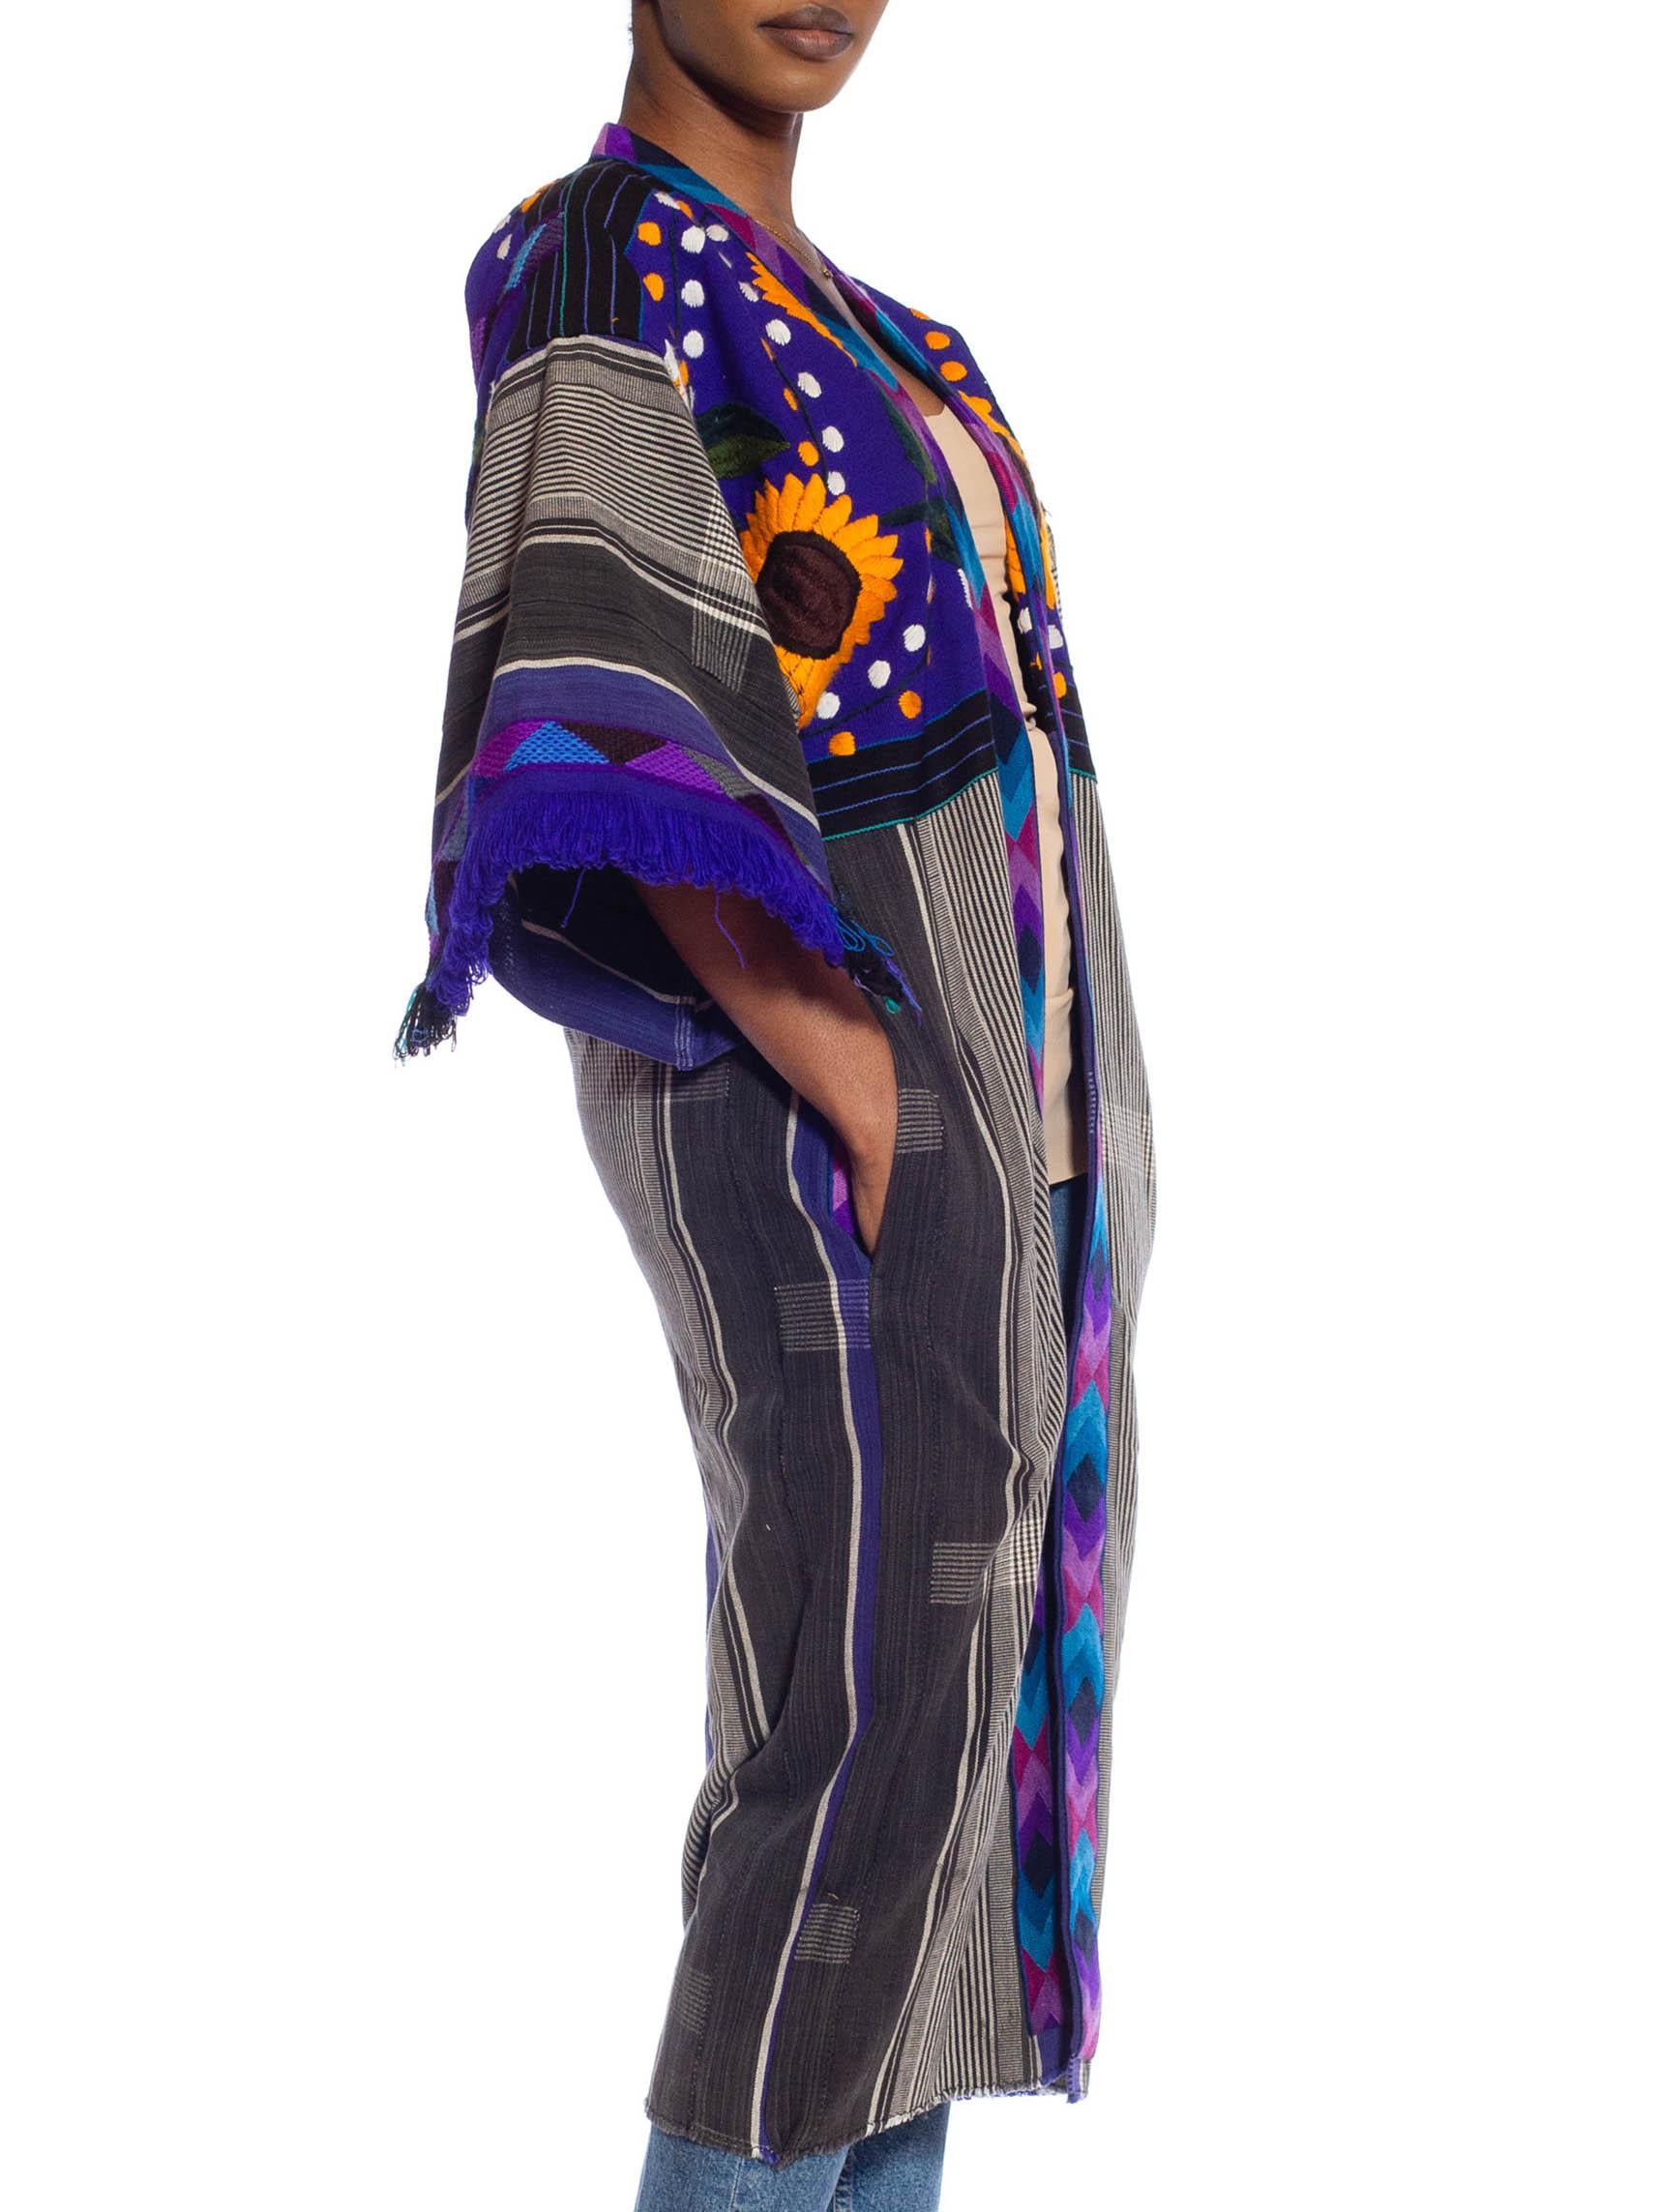 Made from up-cycled vintage fabrics so there are a few areas showing patinated wear. MORPHEW COLLECTION Royal Blue, Sunflower African Cotton Duster With Vintage Hand-Embroidered Details 
MORPHEW COLLECTION is made entirely by hand in our NYC Ateliér